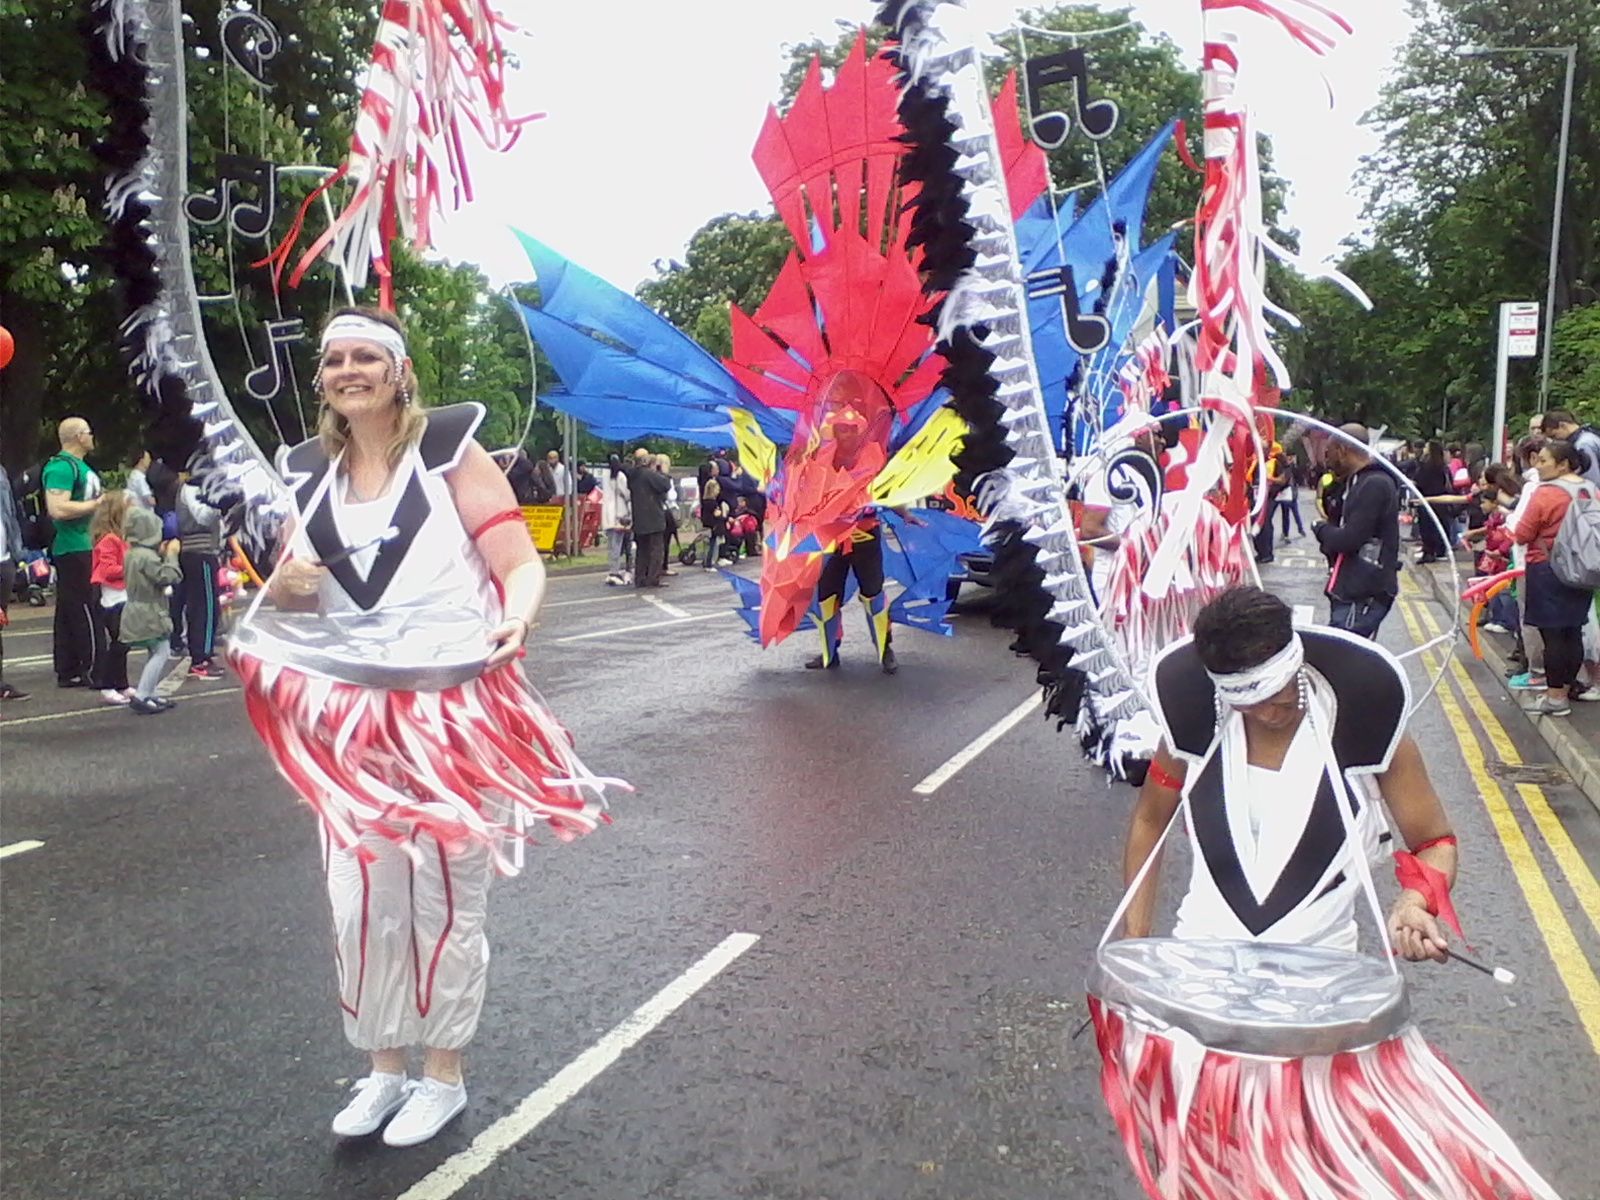 UKcca Canival in Luton